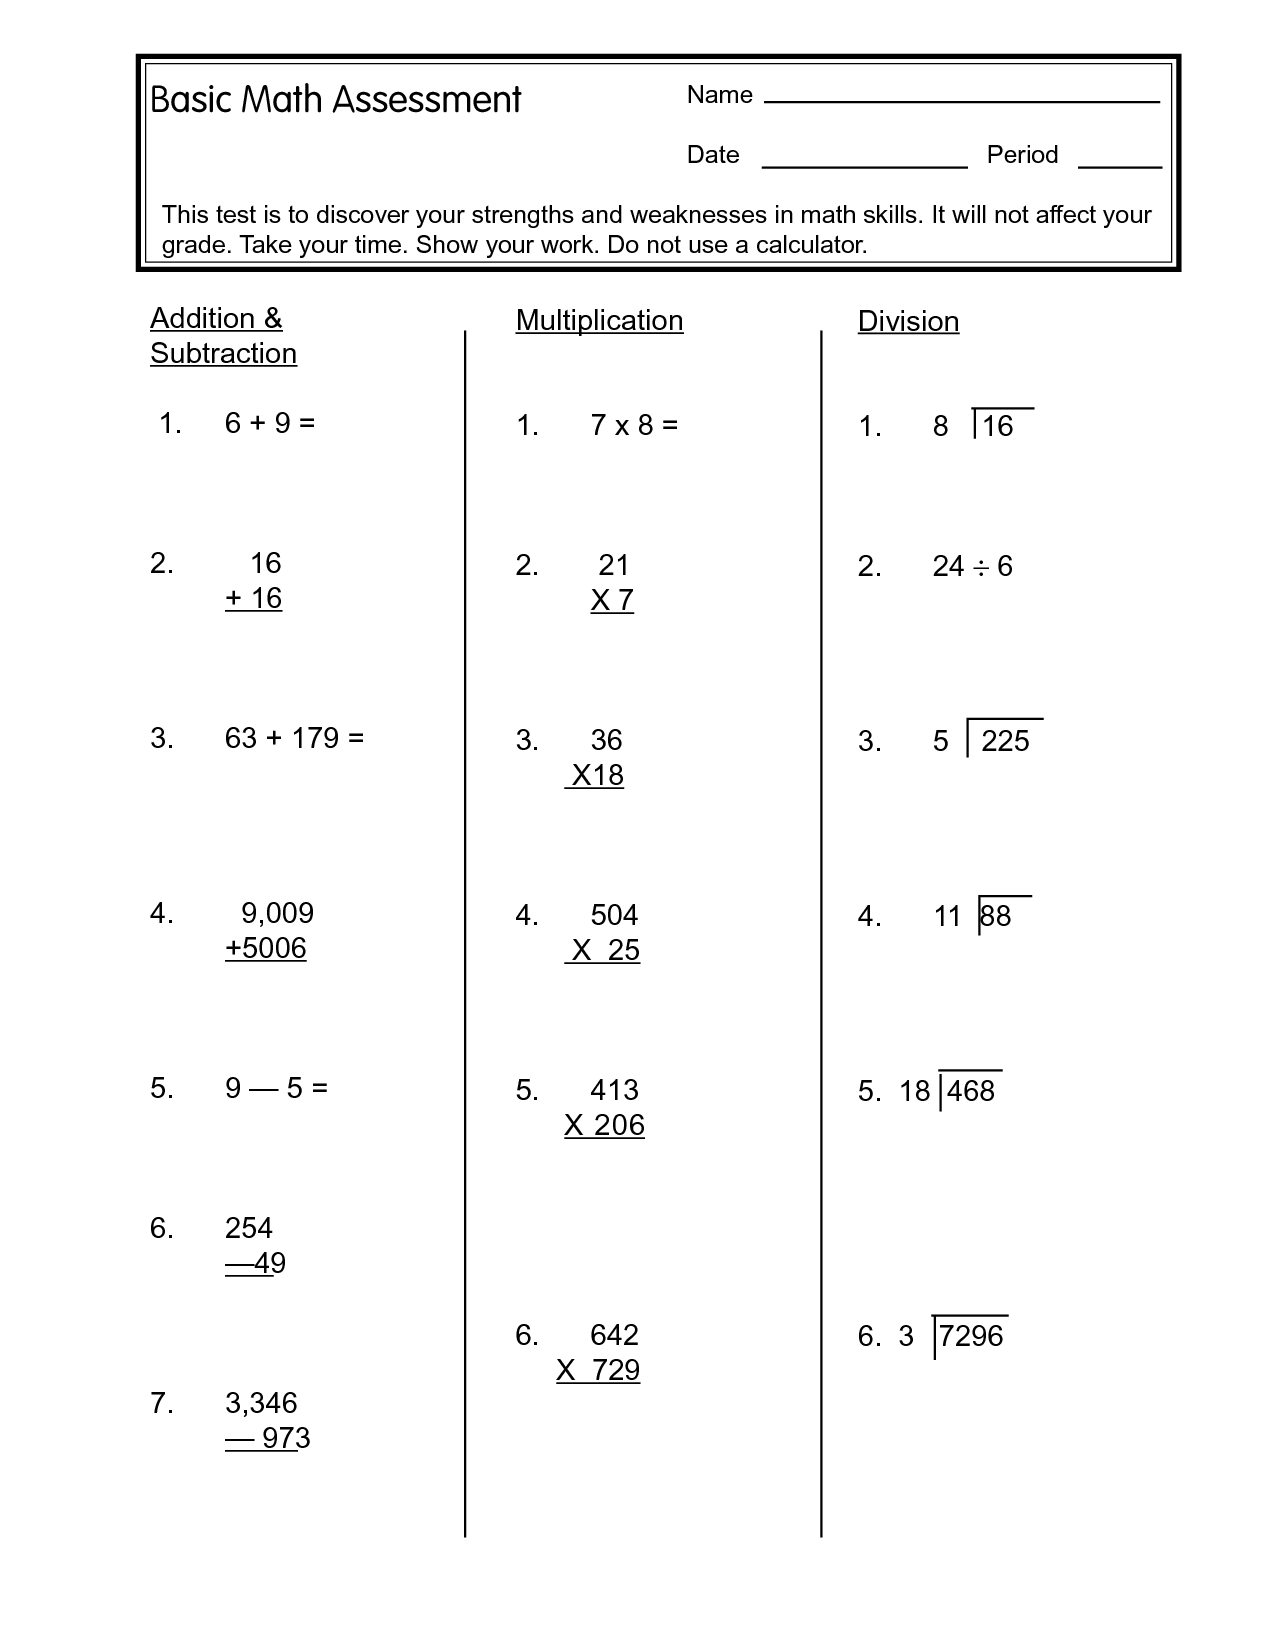 7 Best Images of 6th Grade Math Test Printable - 6th Grade ...